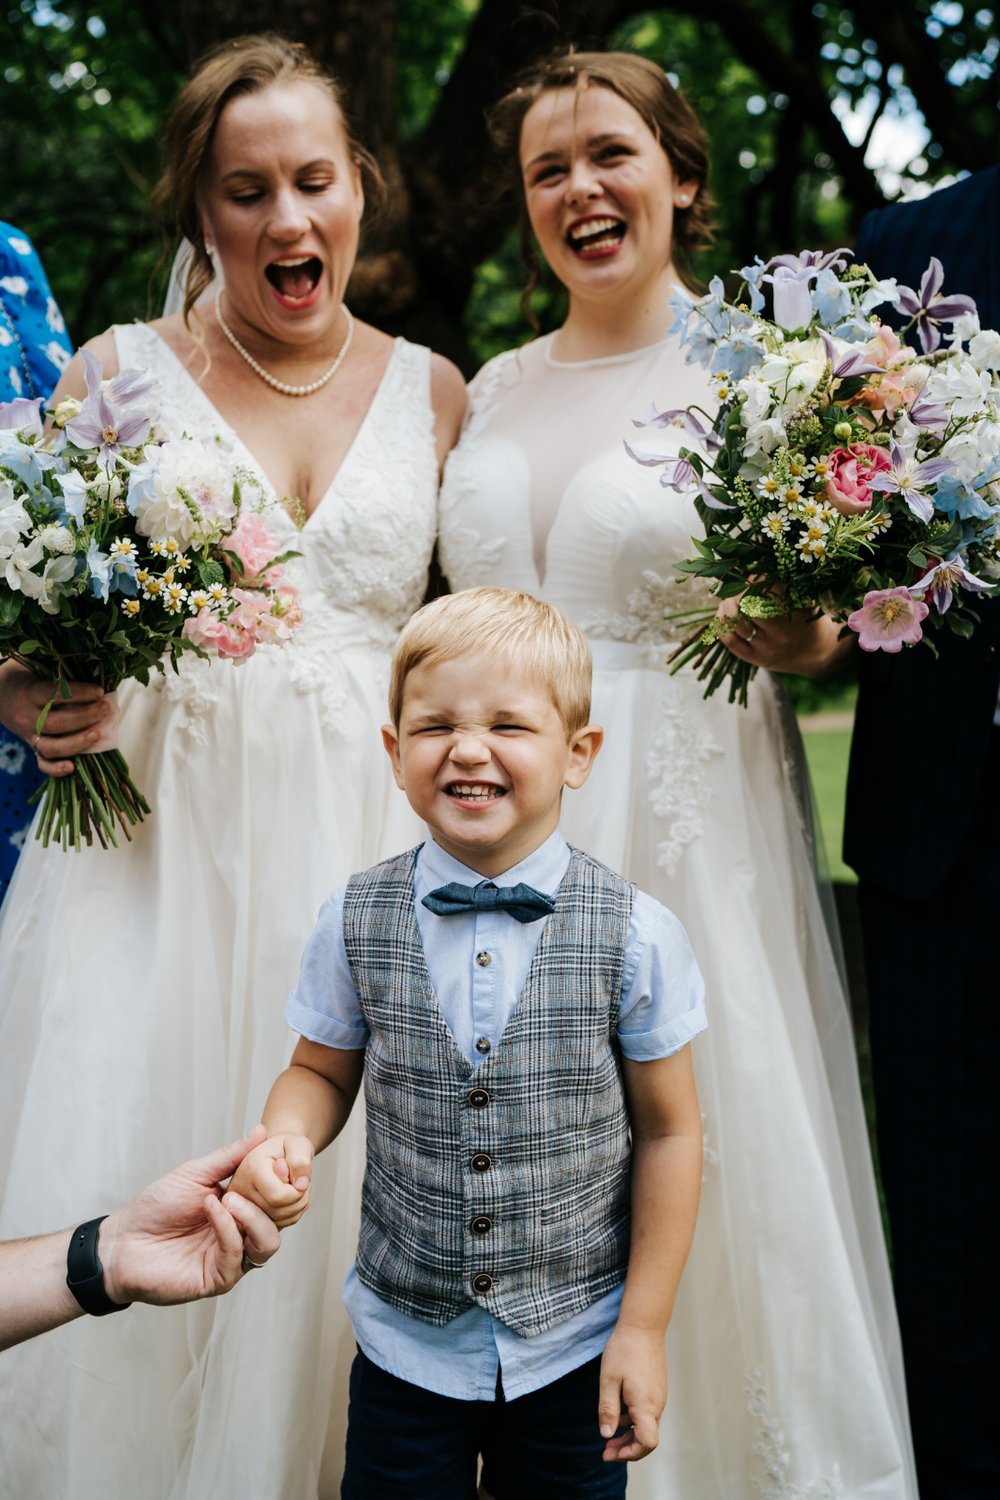 Young boy smiles aggressively as both brides stand behind him during family portraits